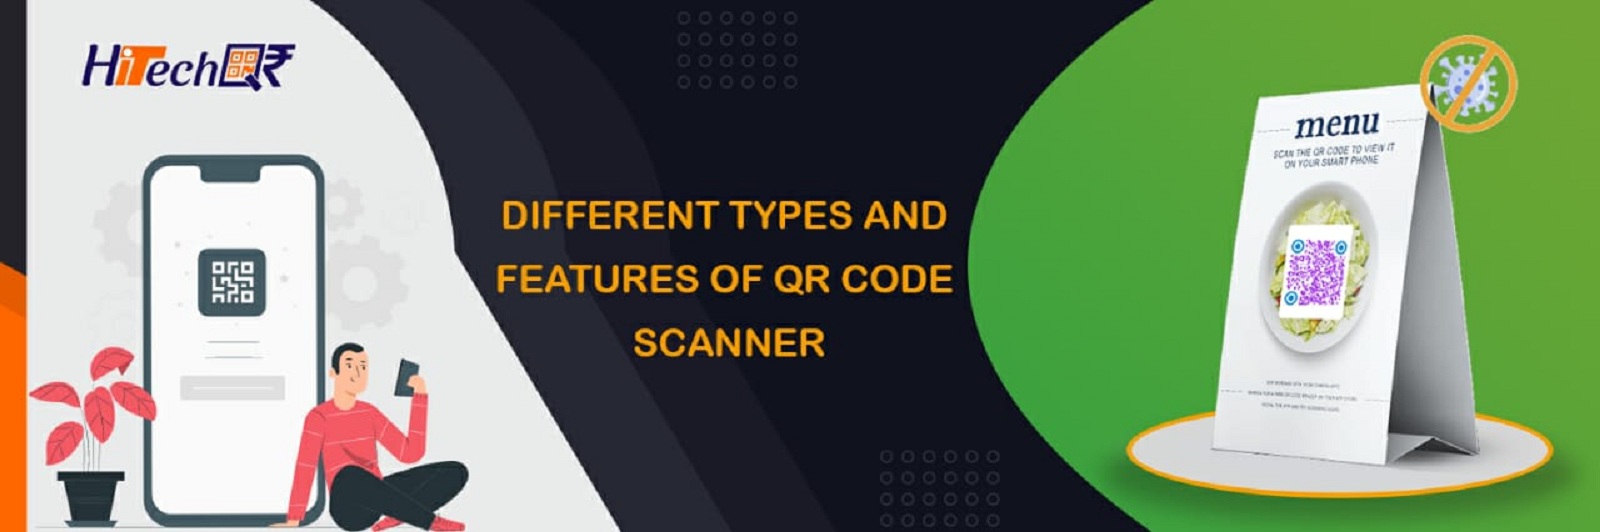 types-and-features-of-qr-scanner